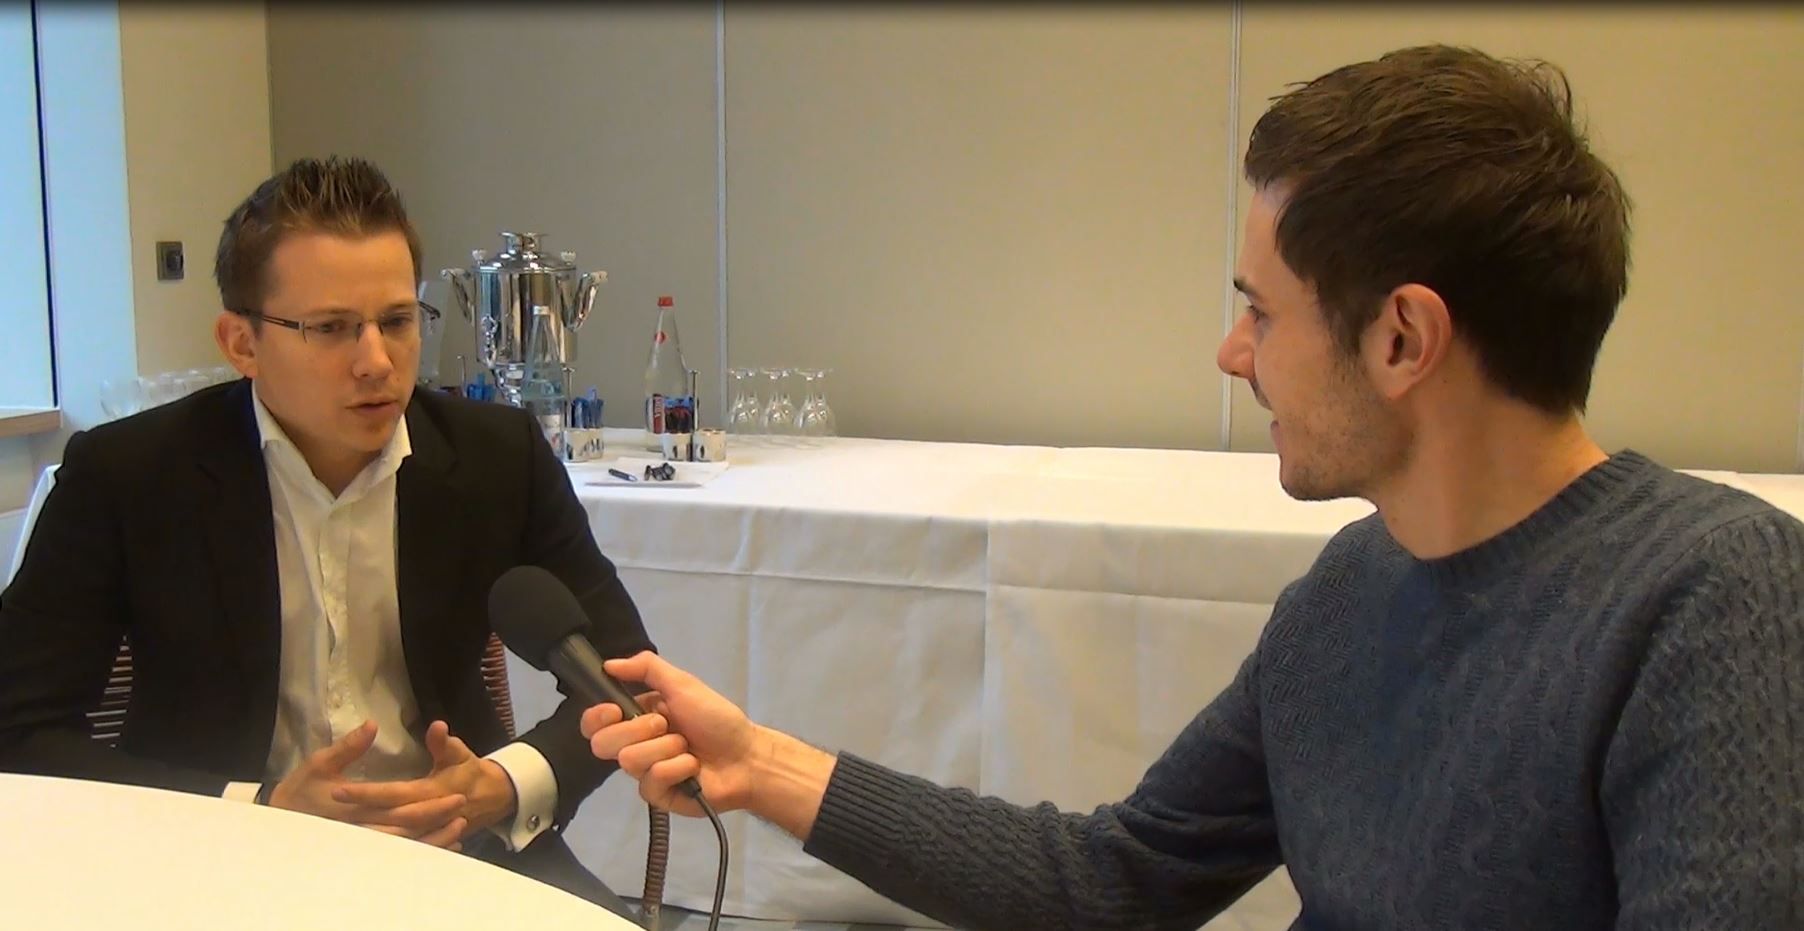 Videointerview mit Jan Rezab, CEO Socialbakers: „Social Measurement is essential to every company“